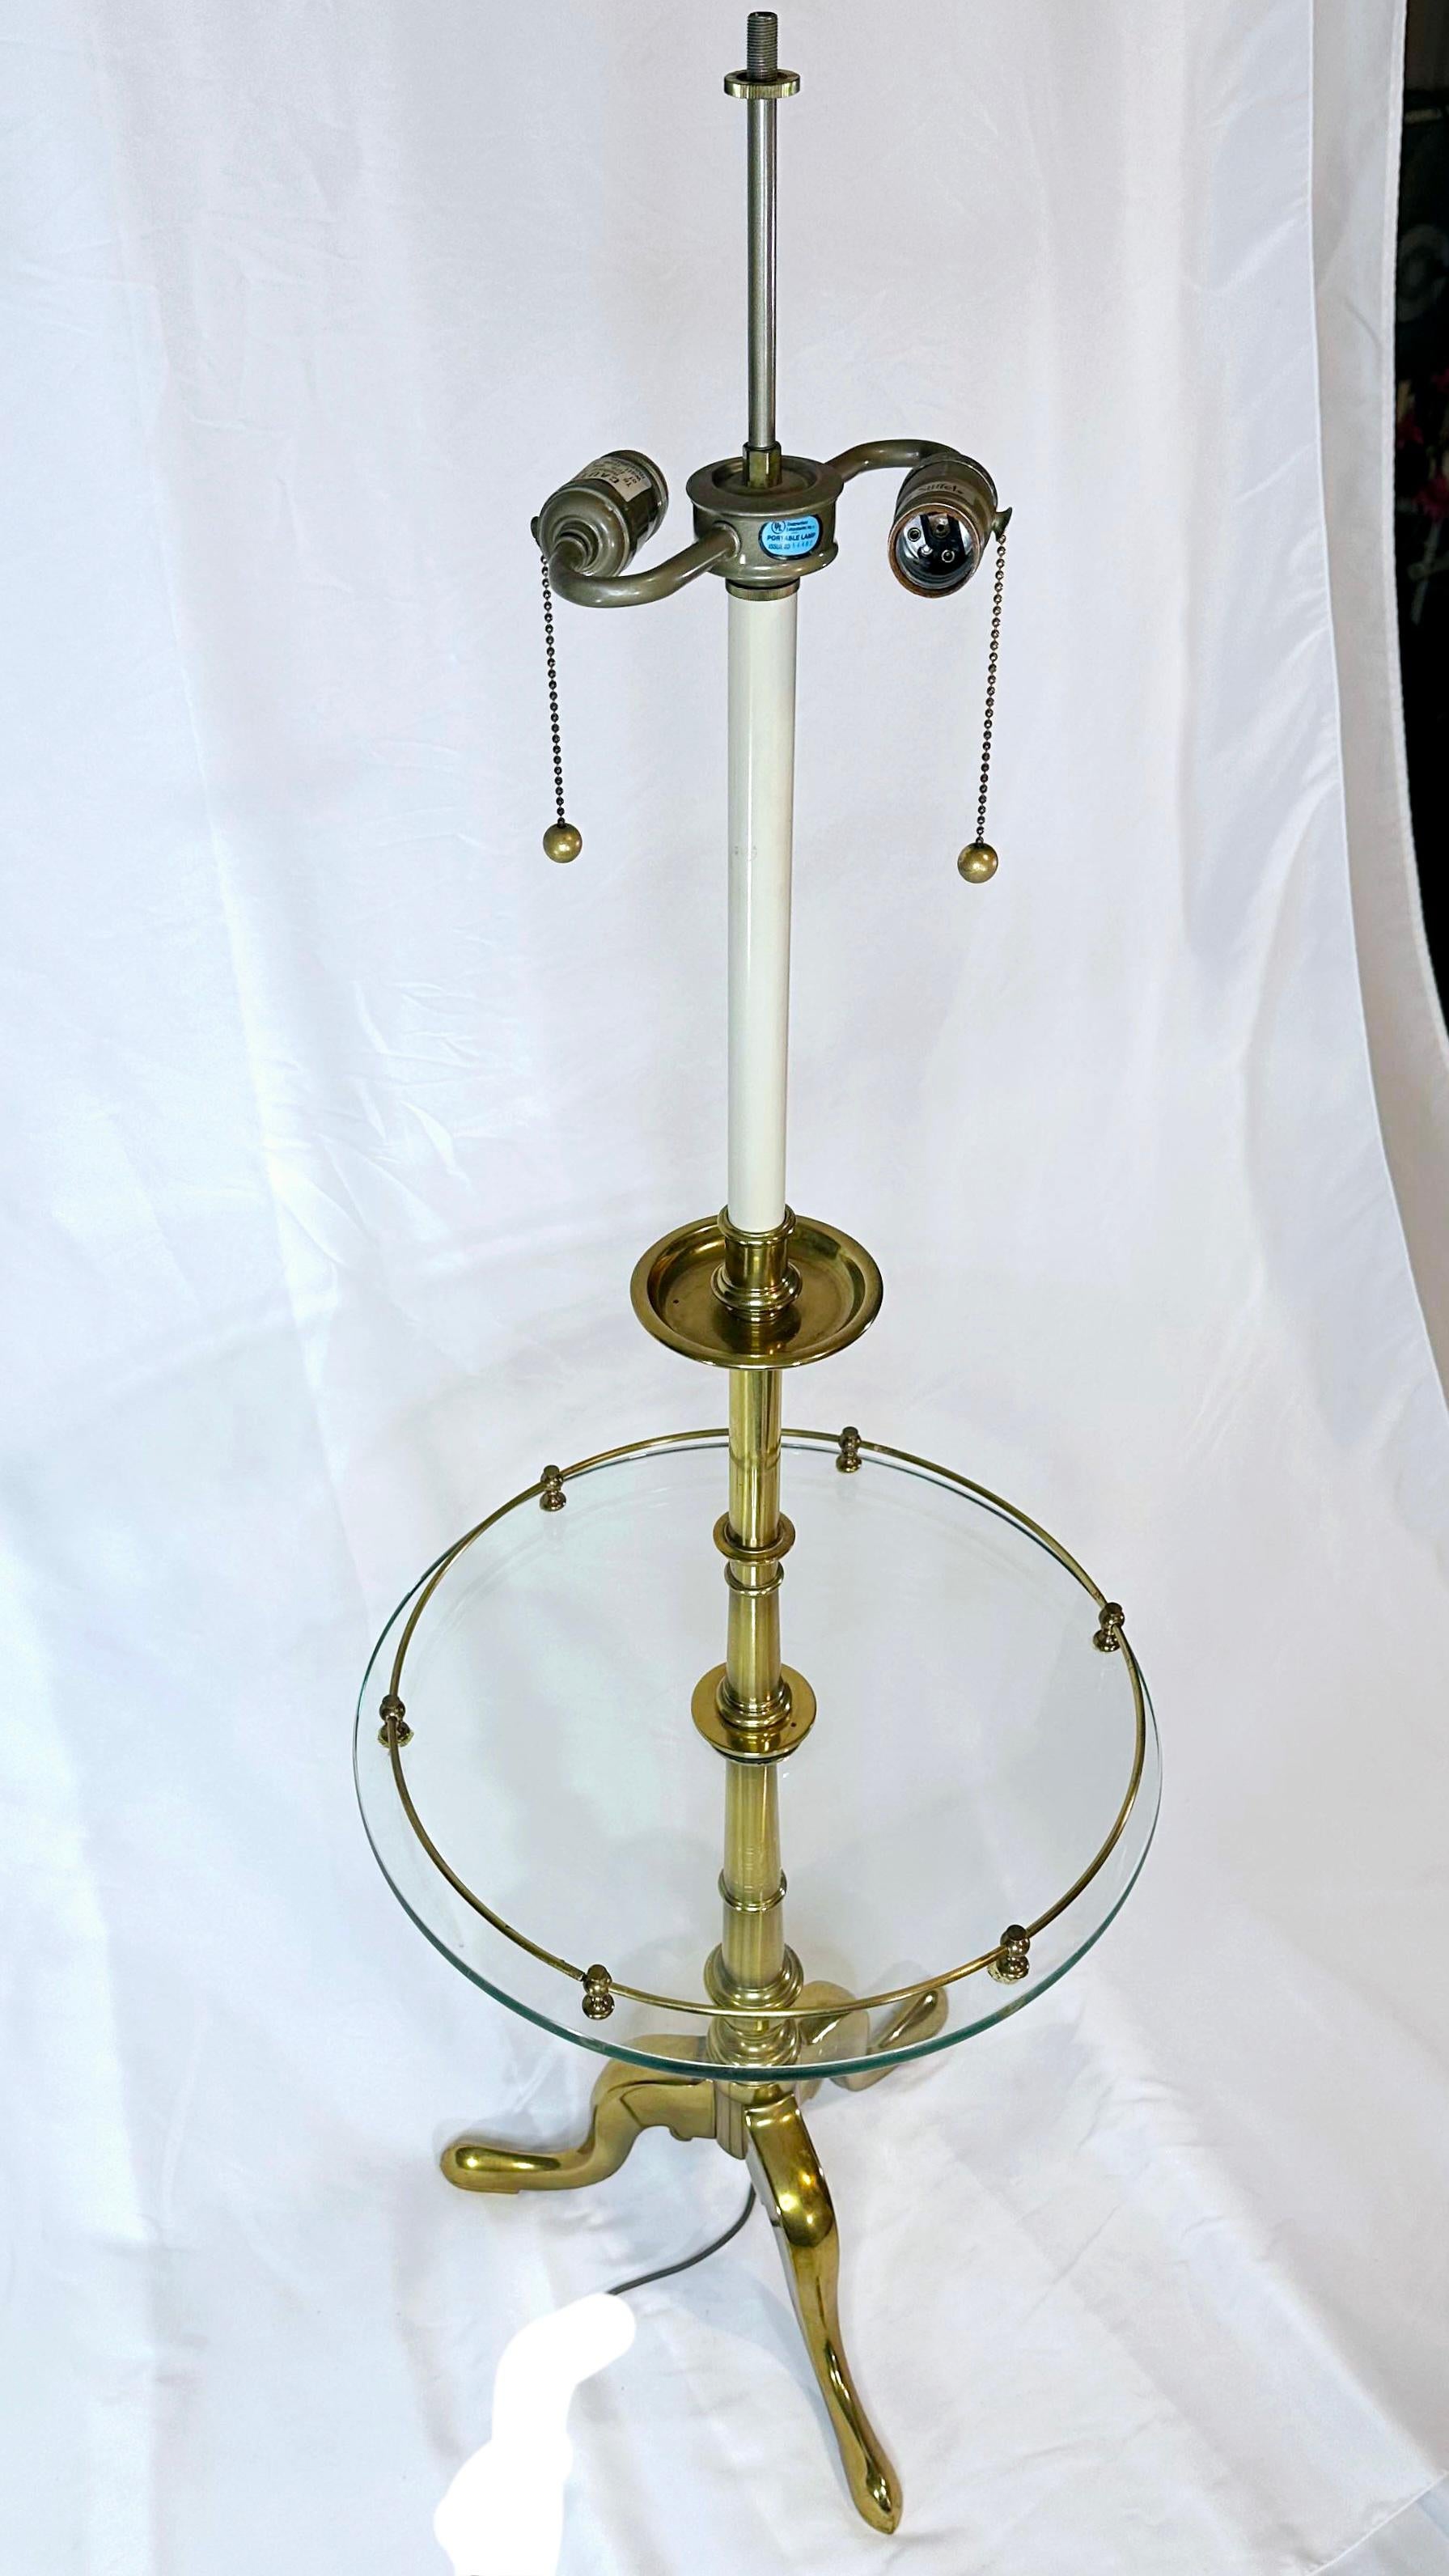 French Provincial Stiffel Floor Lamp With Glass Table and tripod legs 19